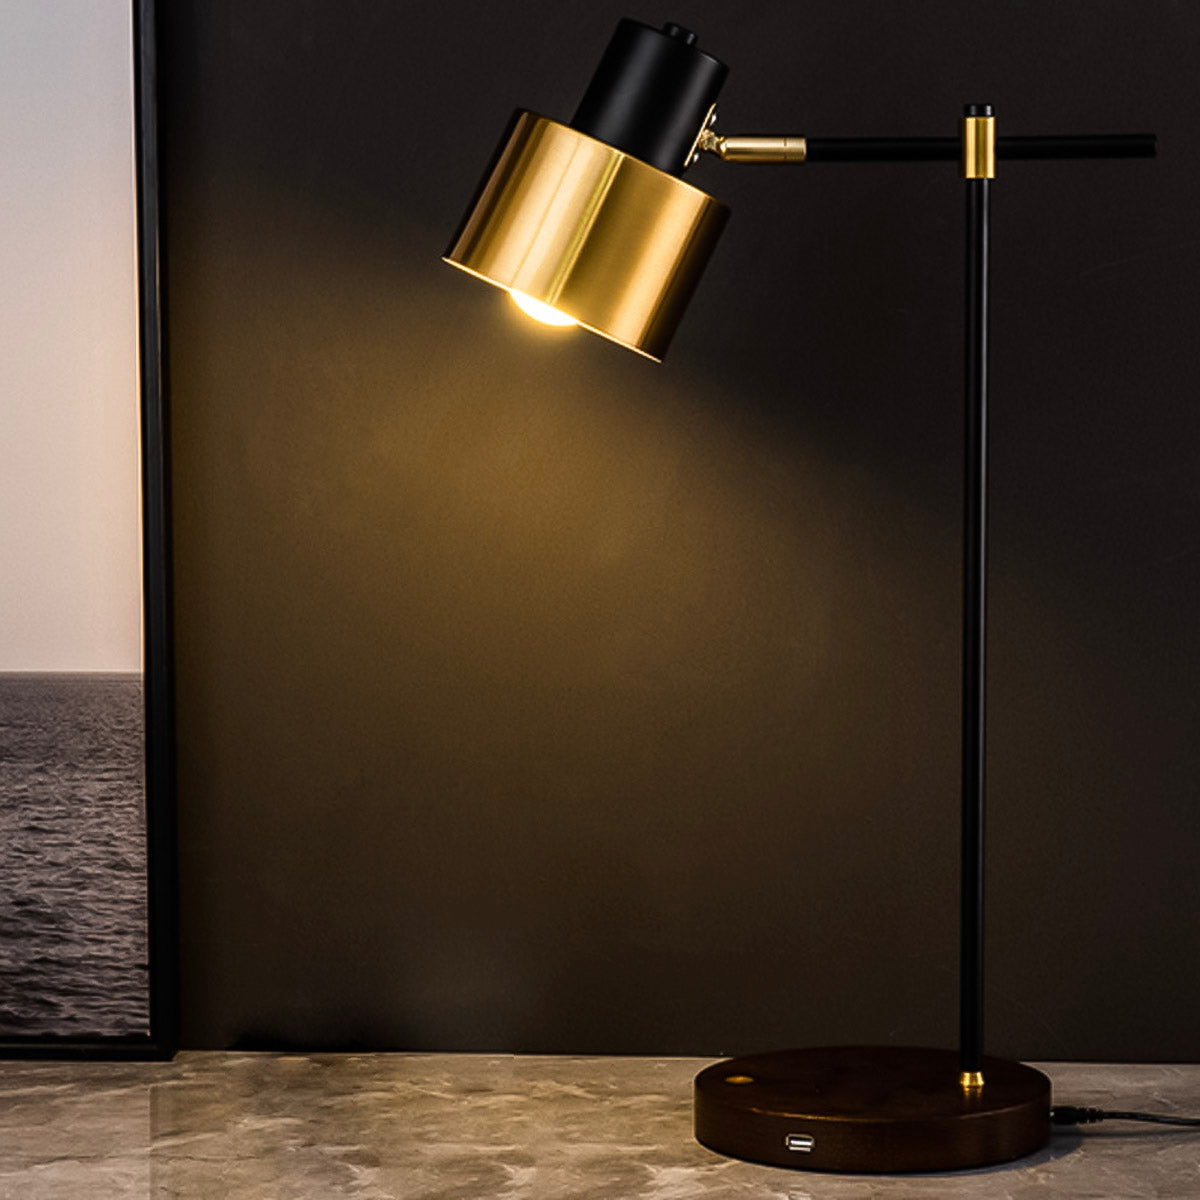 Gold & Black Table Lamp With Wirelss Charger USB - Modern Design - Living Room